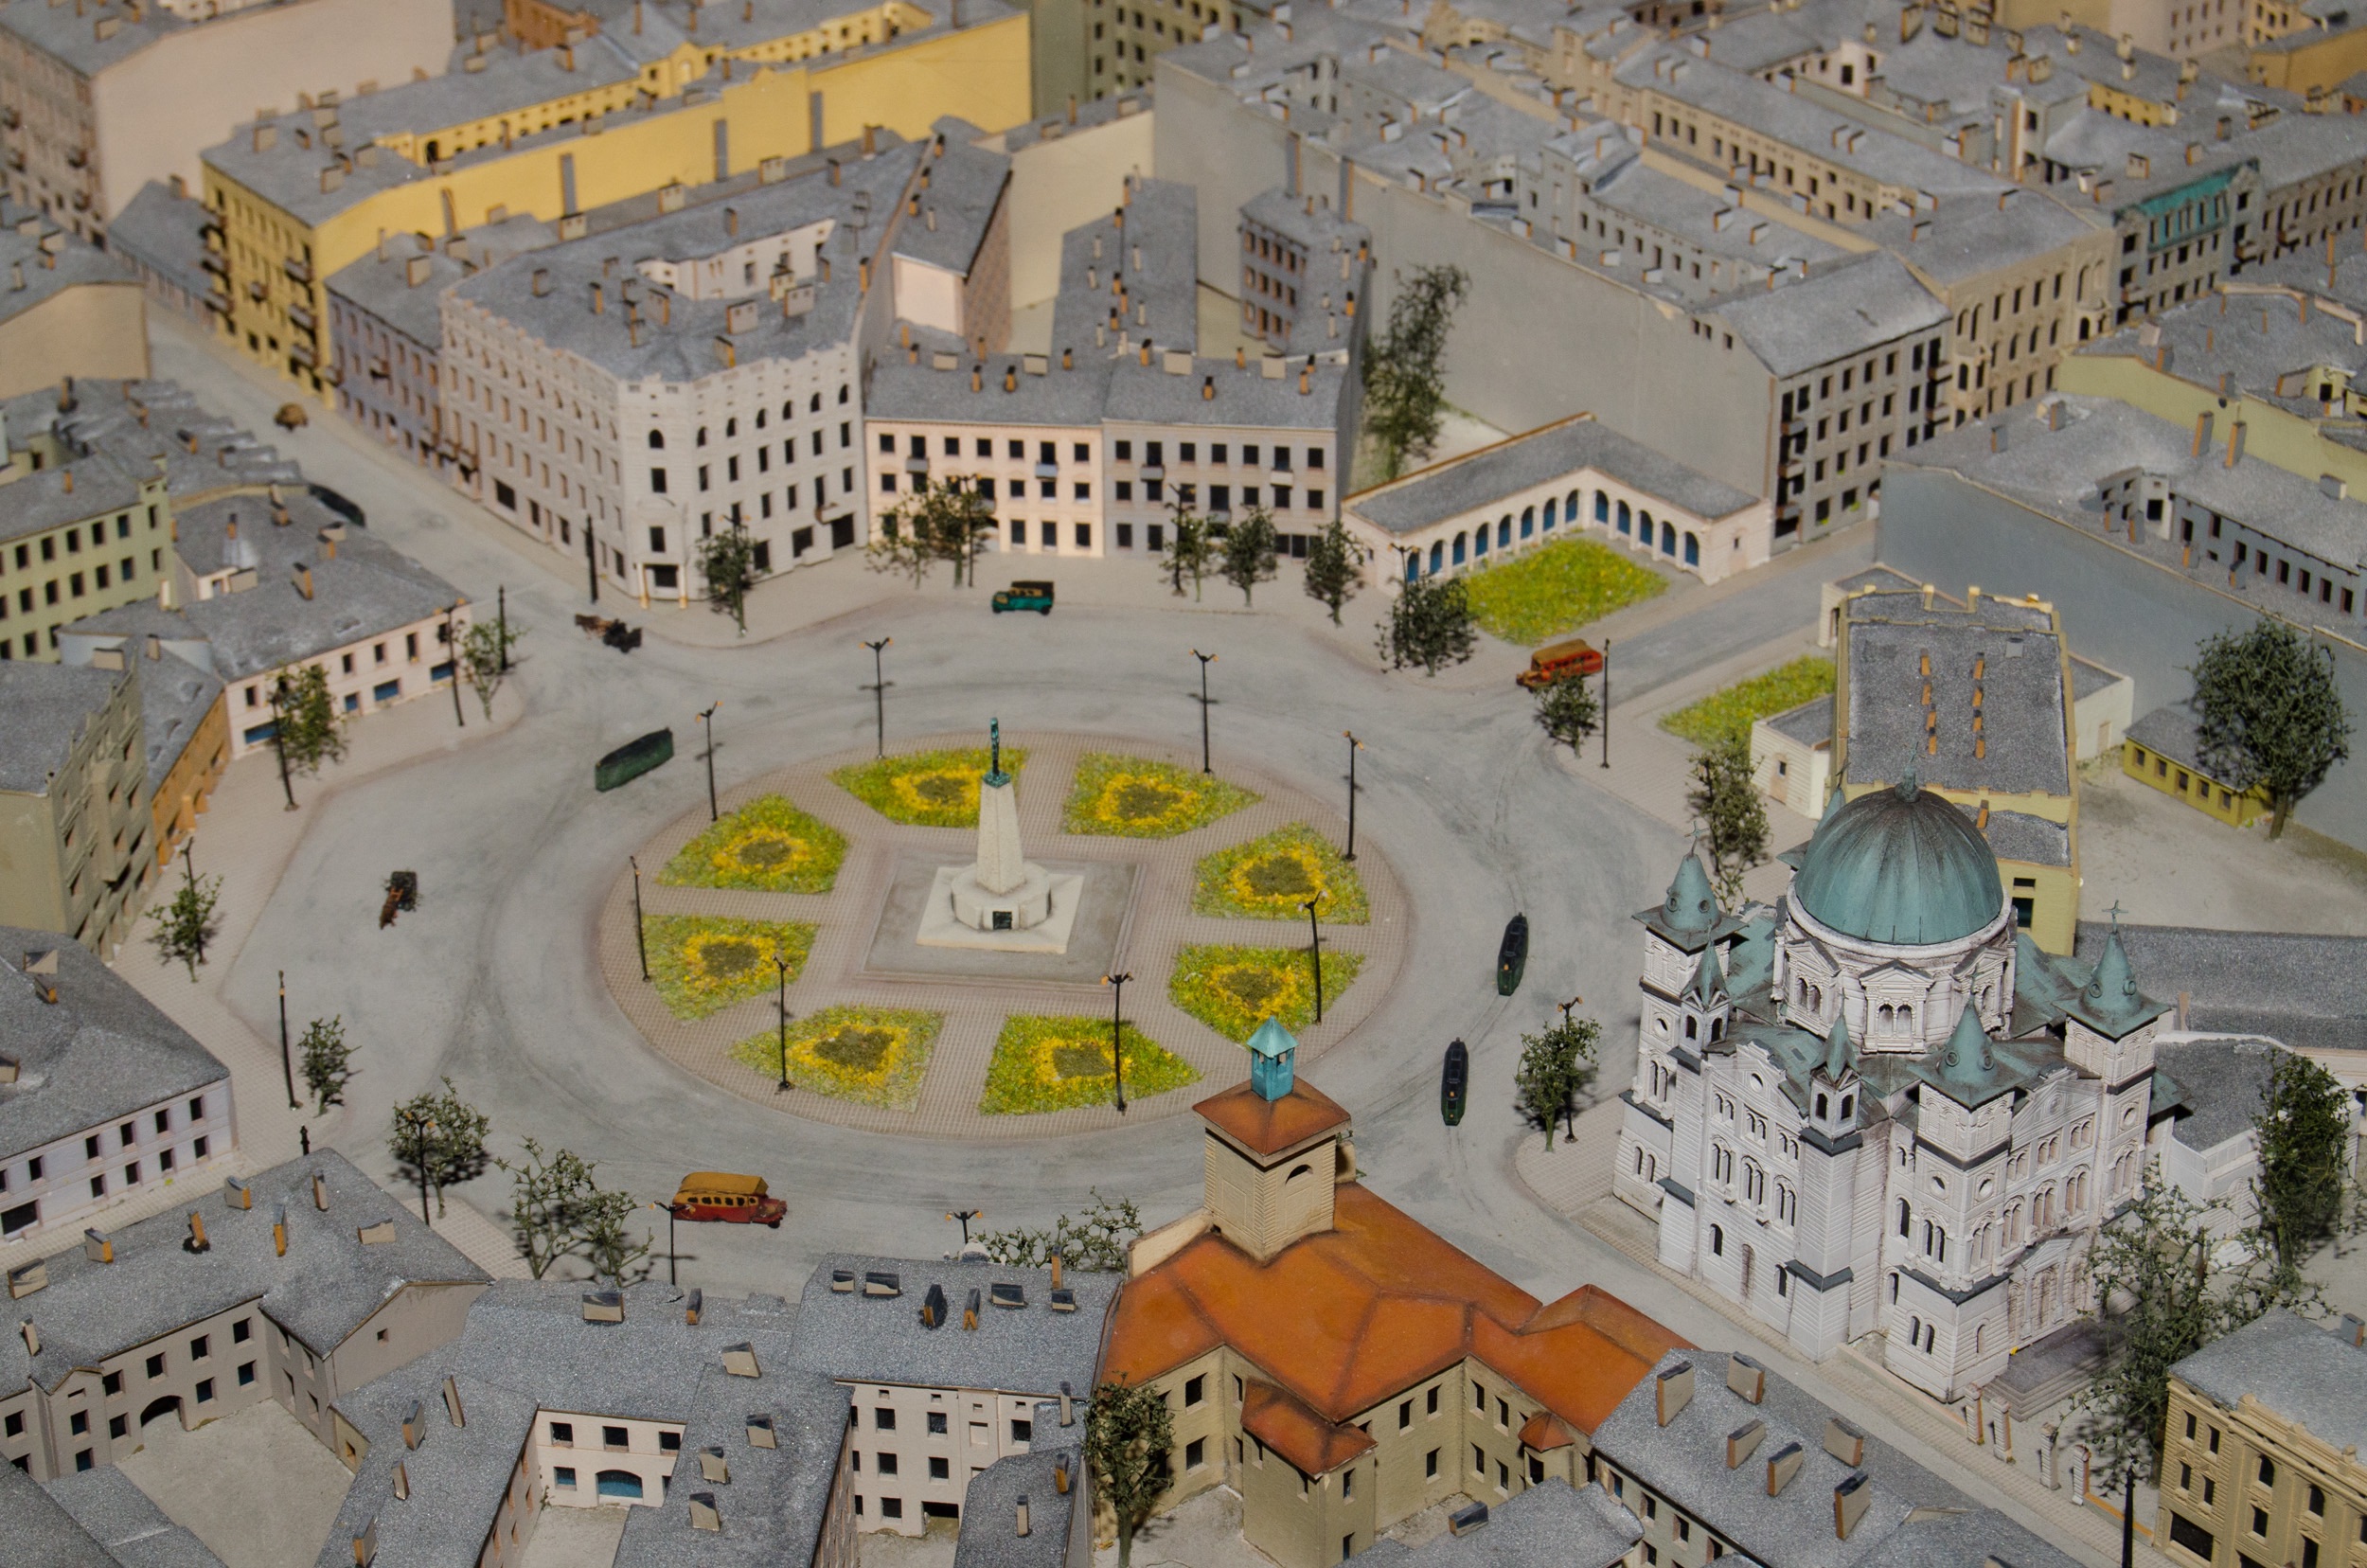 Fig. 1: Model of the “lost quarter”of the city of Lodz, detail. Photograph by Bożena Szafrańska (Museum of the City of Lodz)